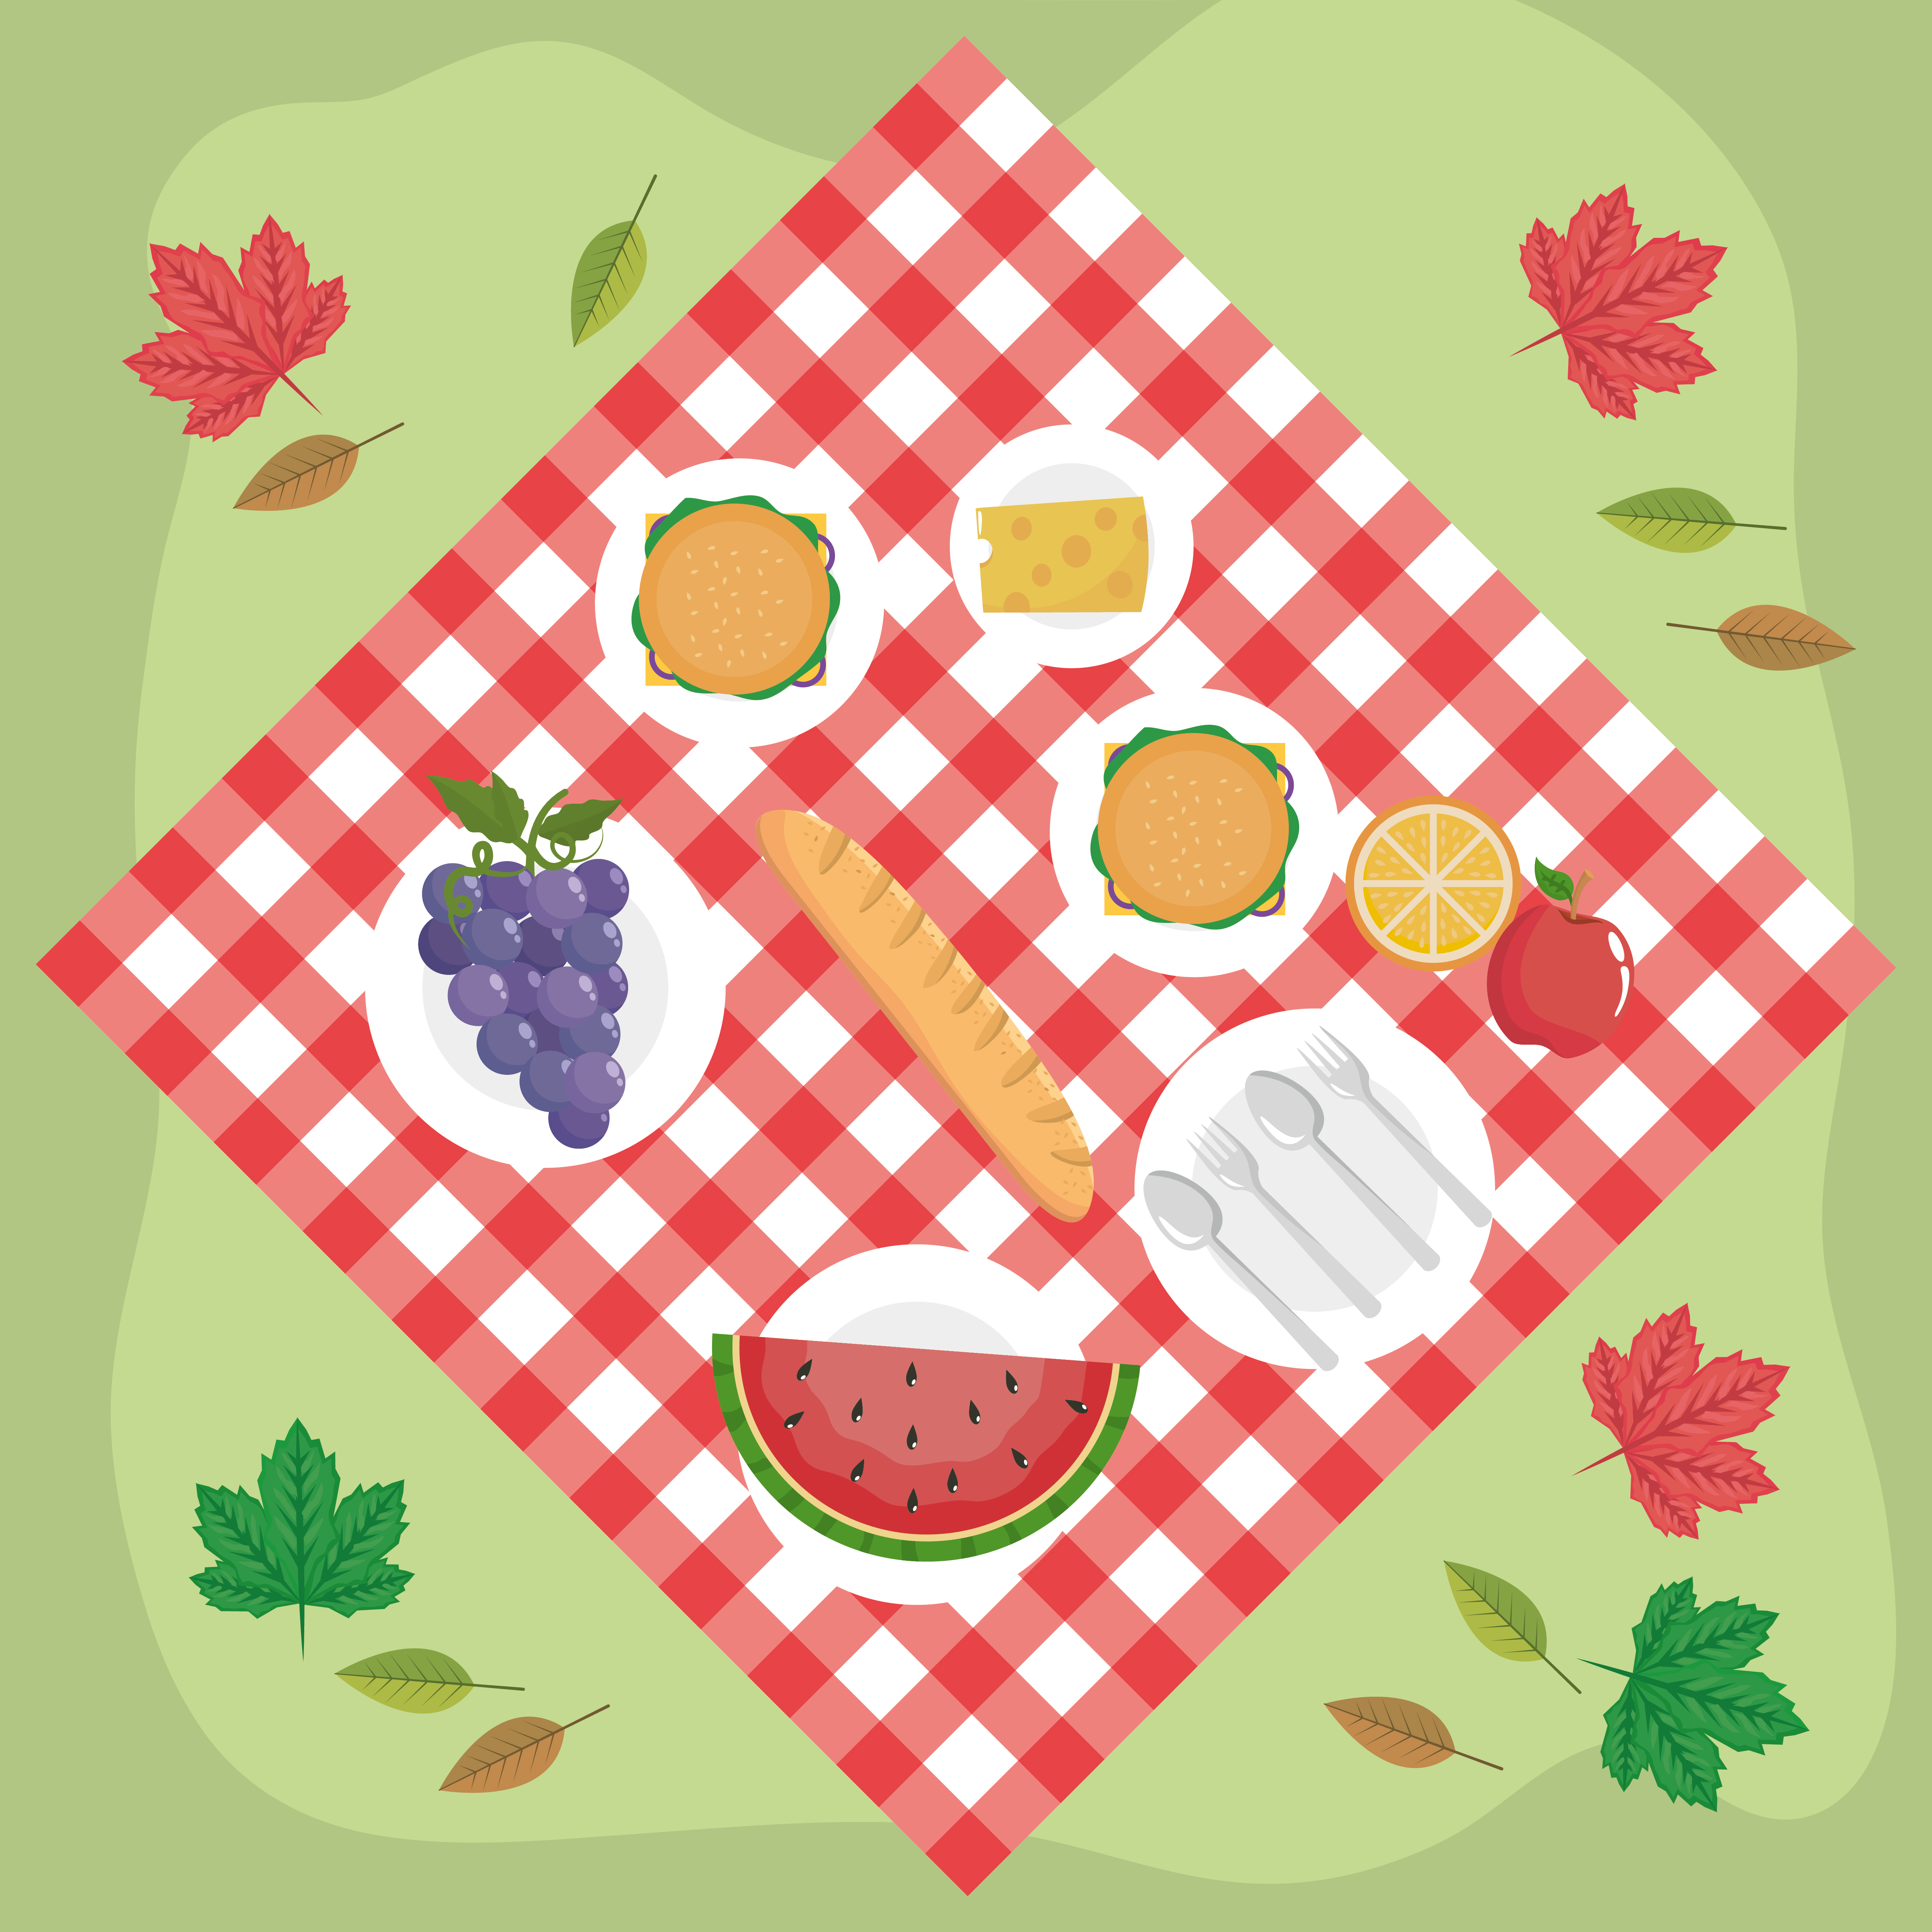 Download the Aerial view of food on picnic blanket 670457